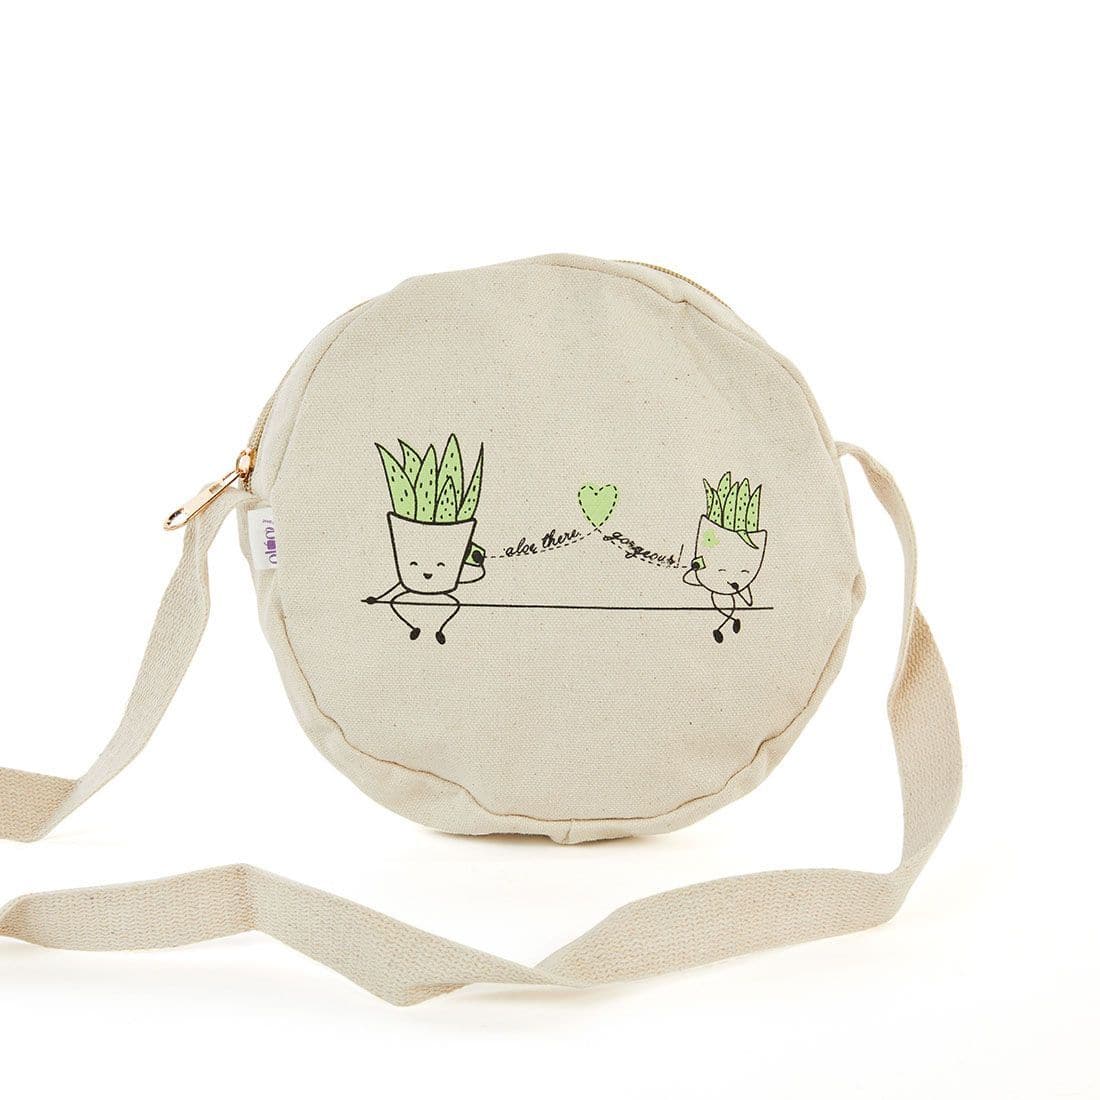 Aloe There Gorgeous Canvas Bag